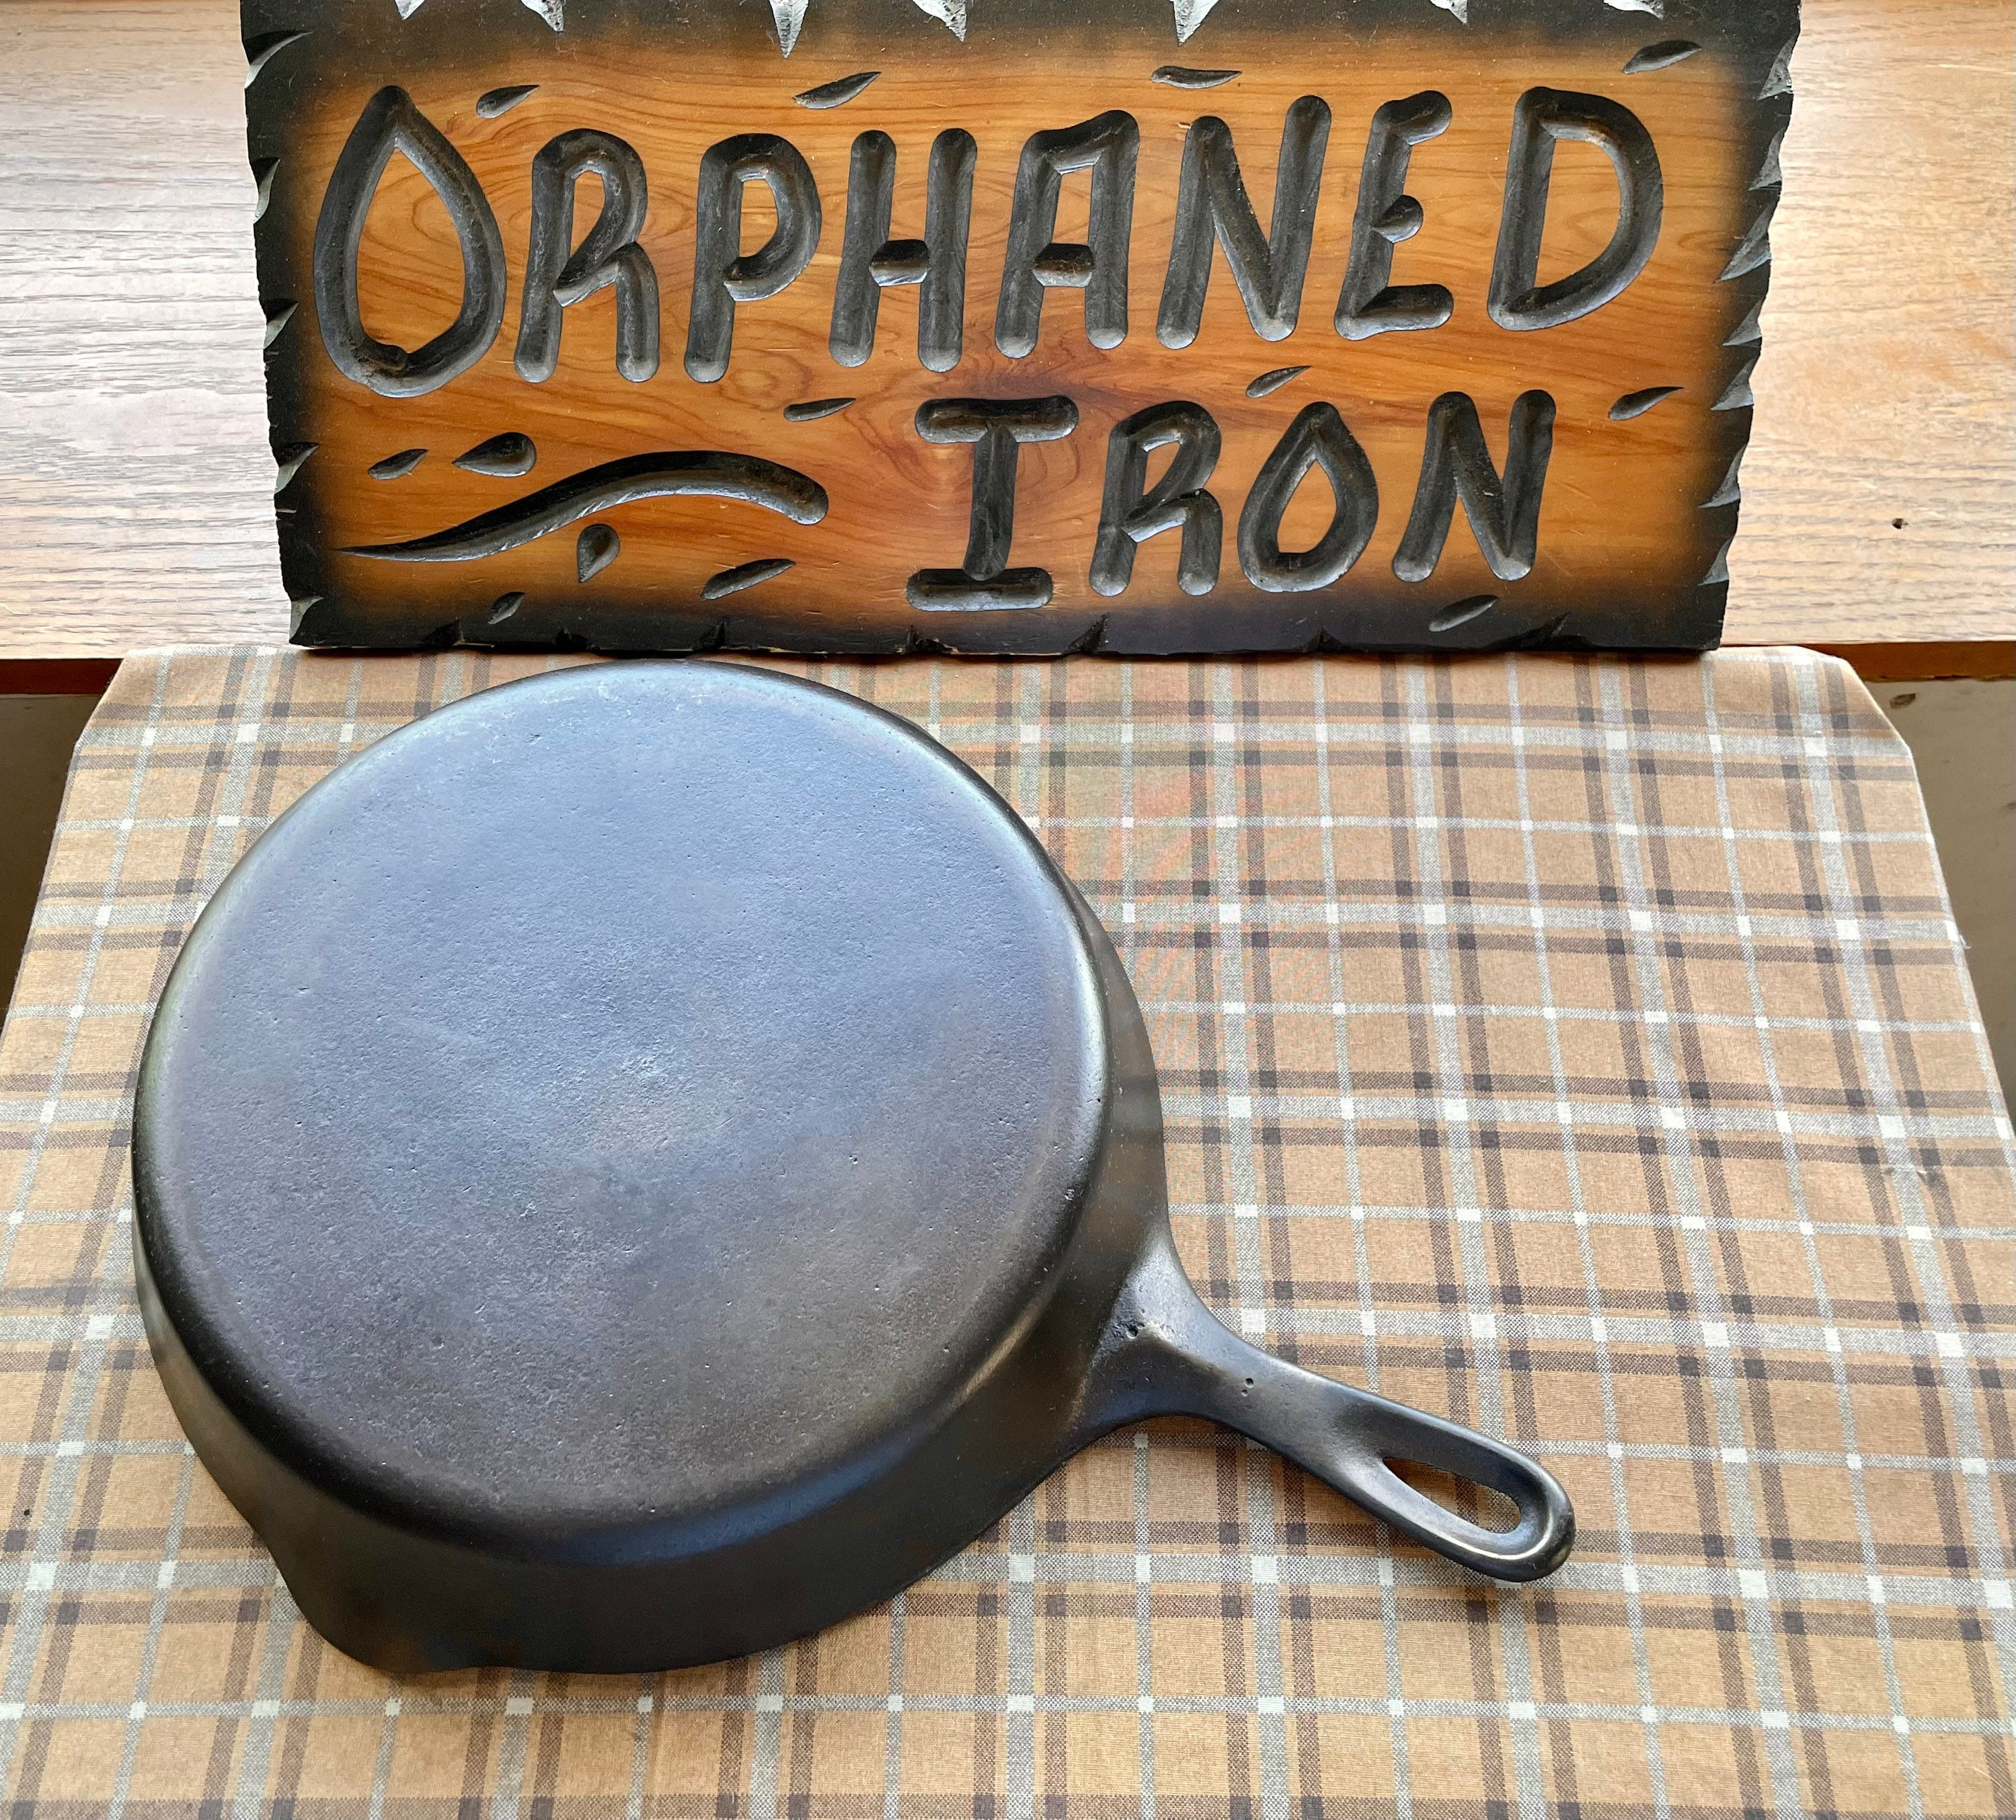 1930's Wagner Ware #9 Cast Iron Round Griddle, 1109 B – Cast & Clara Bell